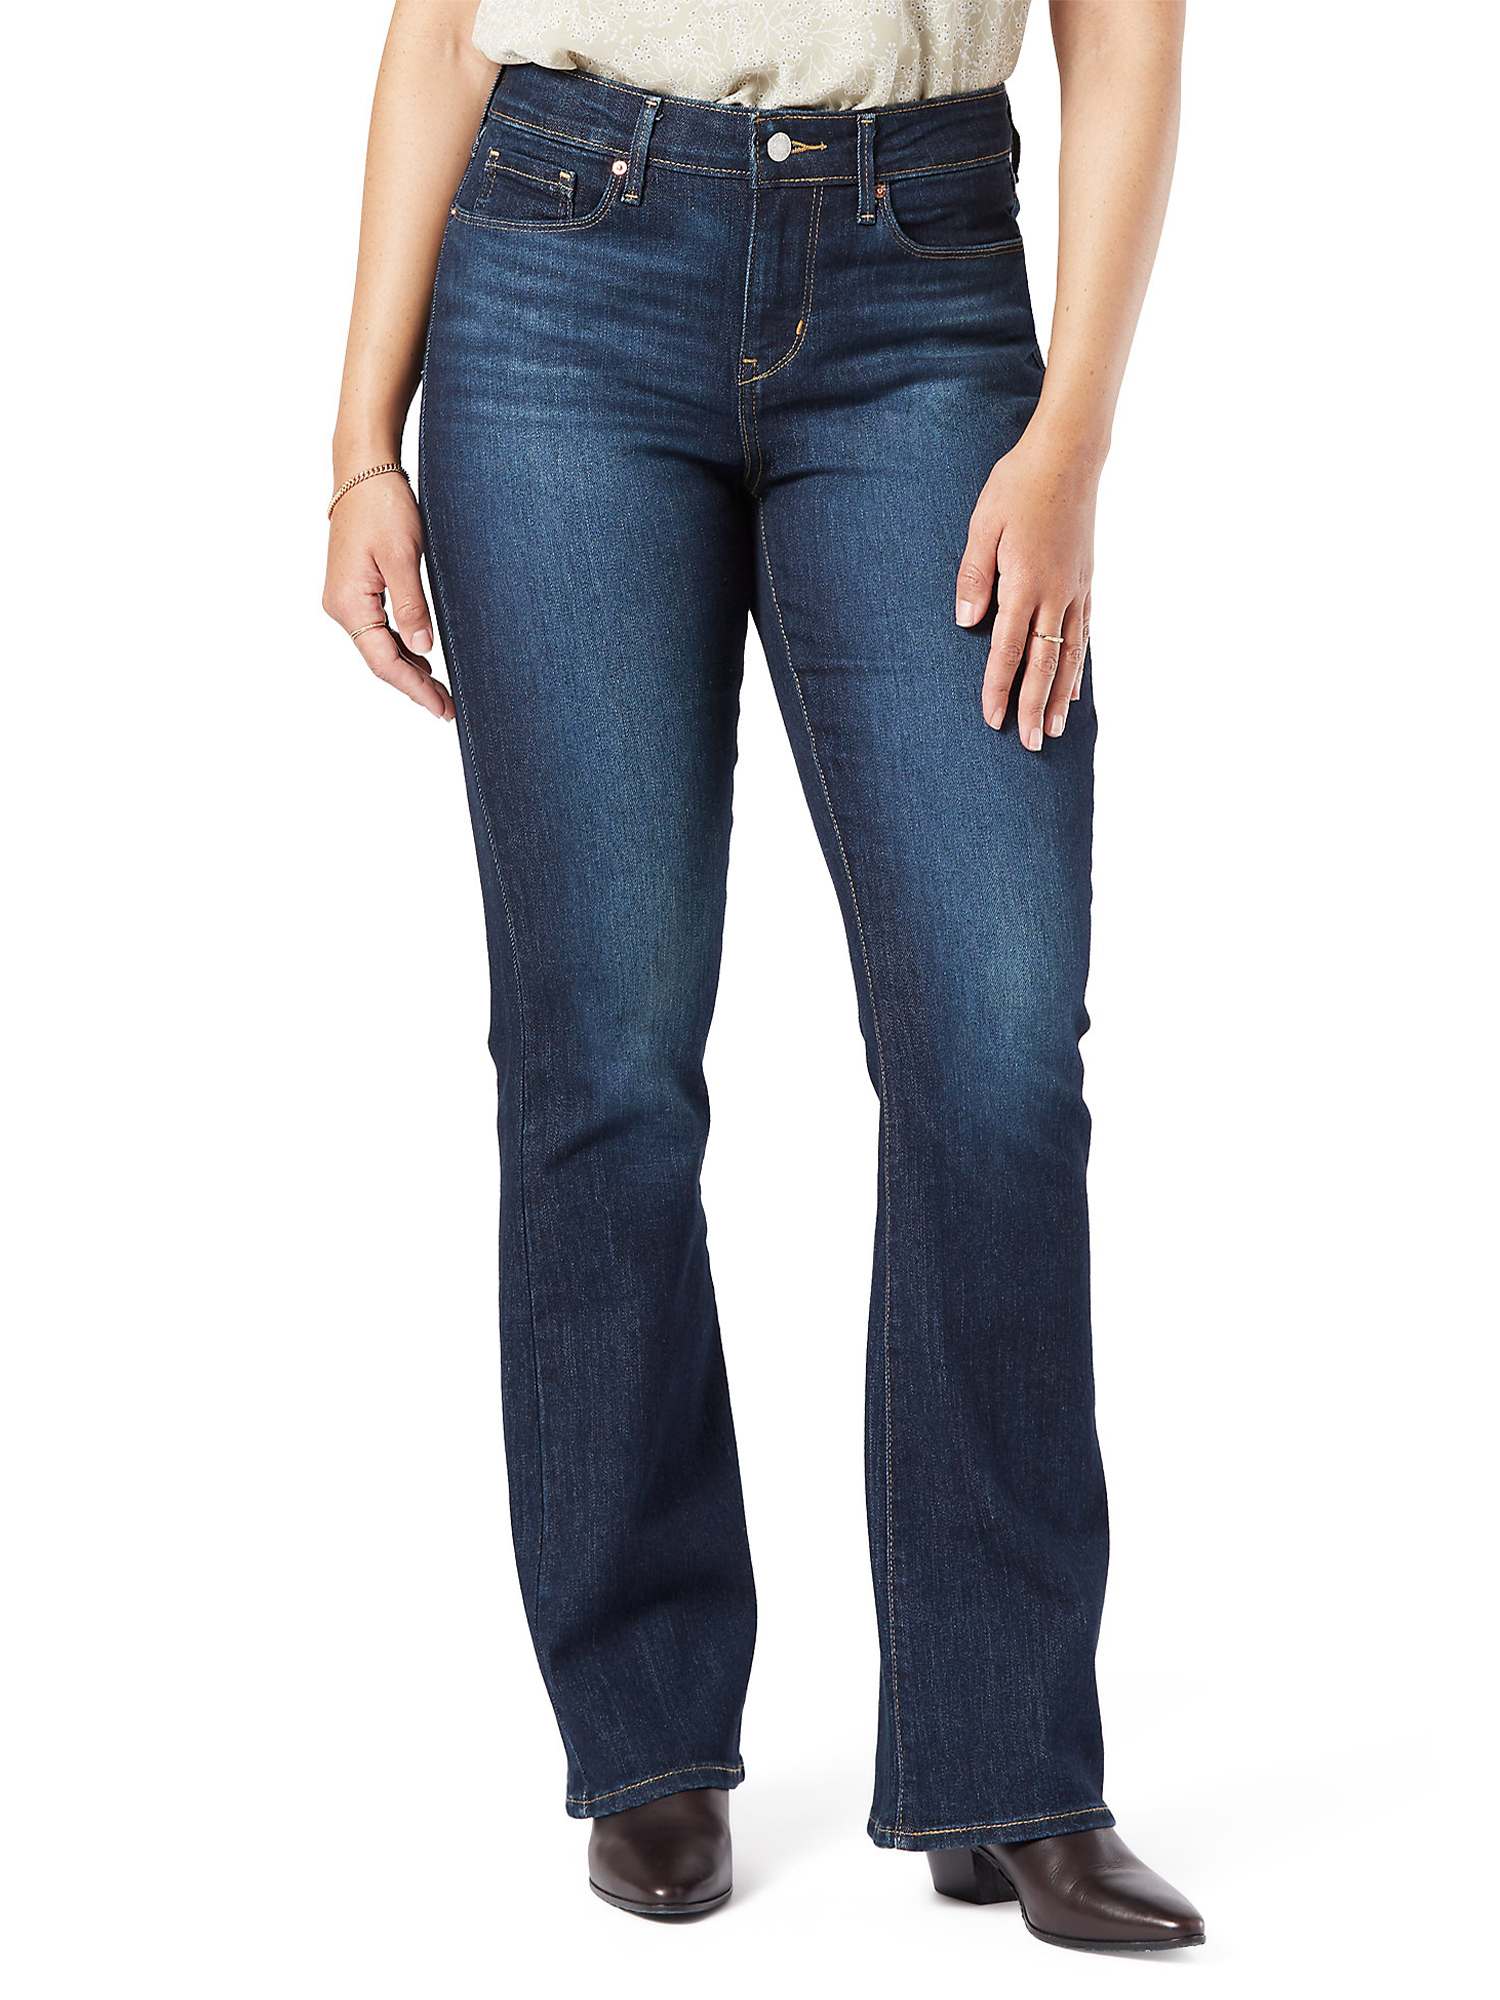 Signature by Levi Strauss & Co. Women's and Women's Plus Modern Bootcut Jeans - image 1 of 5